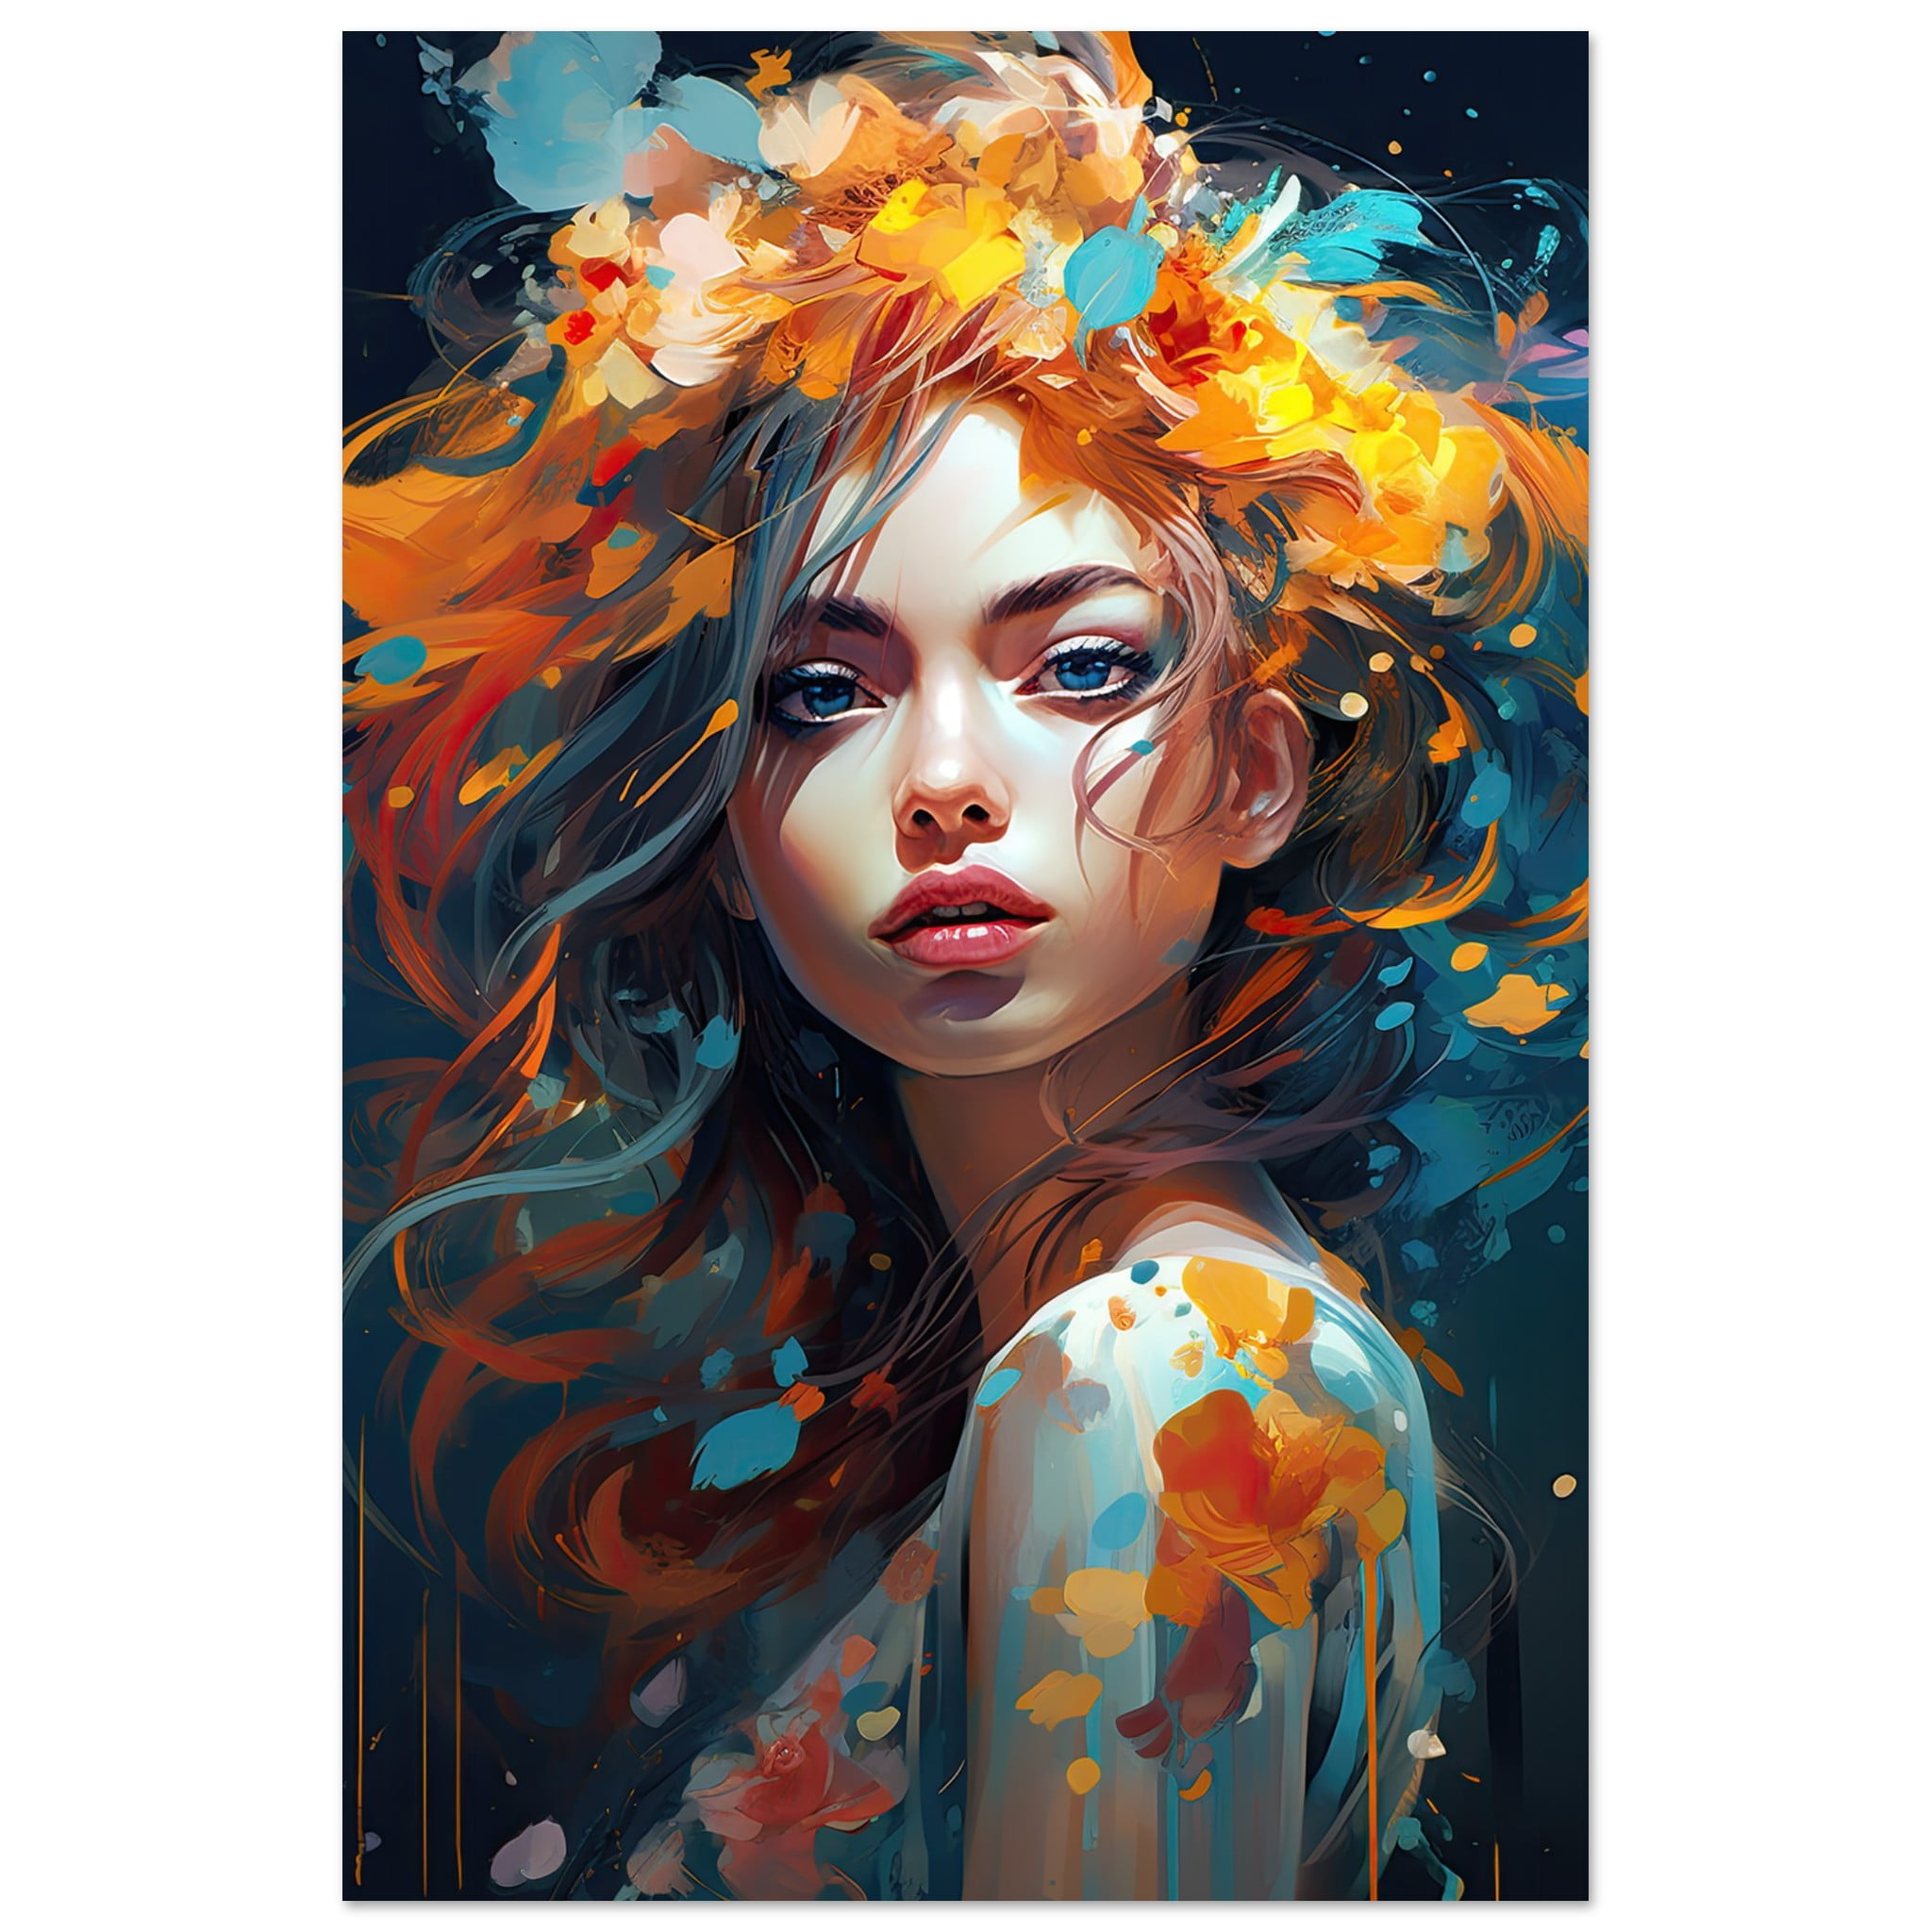 Girl Painted in Color Art Poster – 30×45 cm / 12×18″